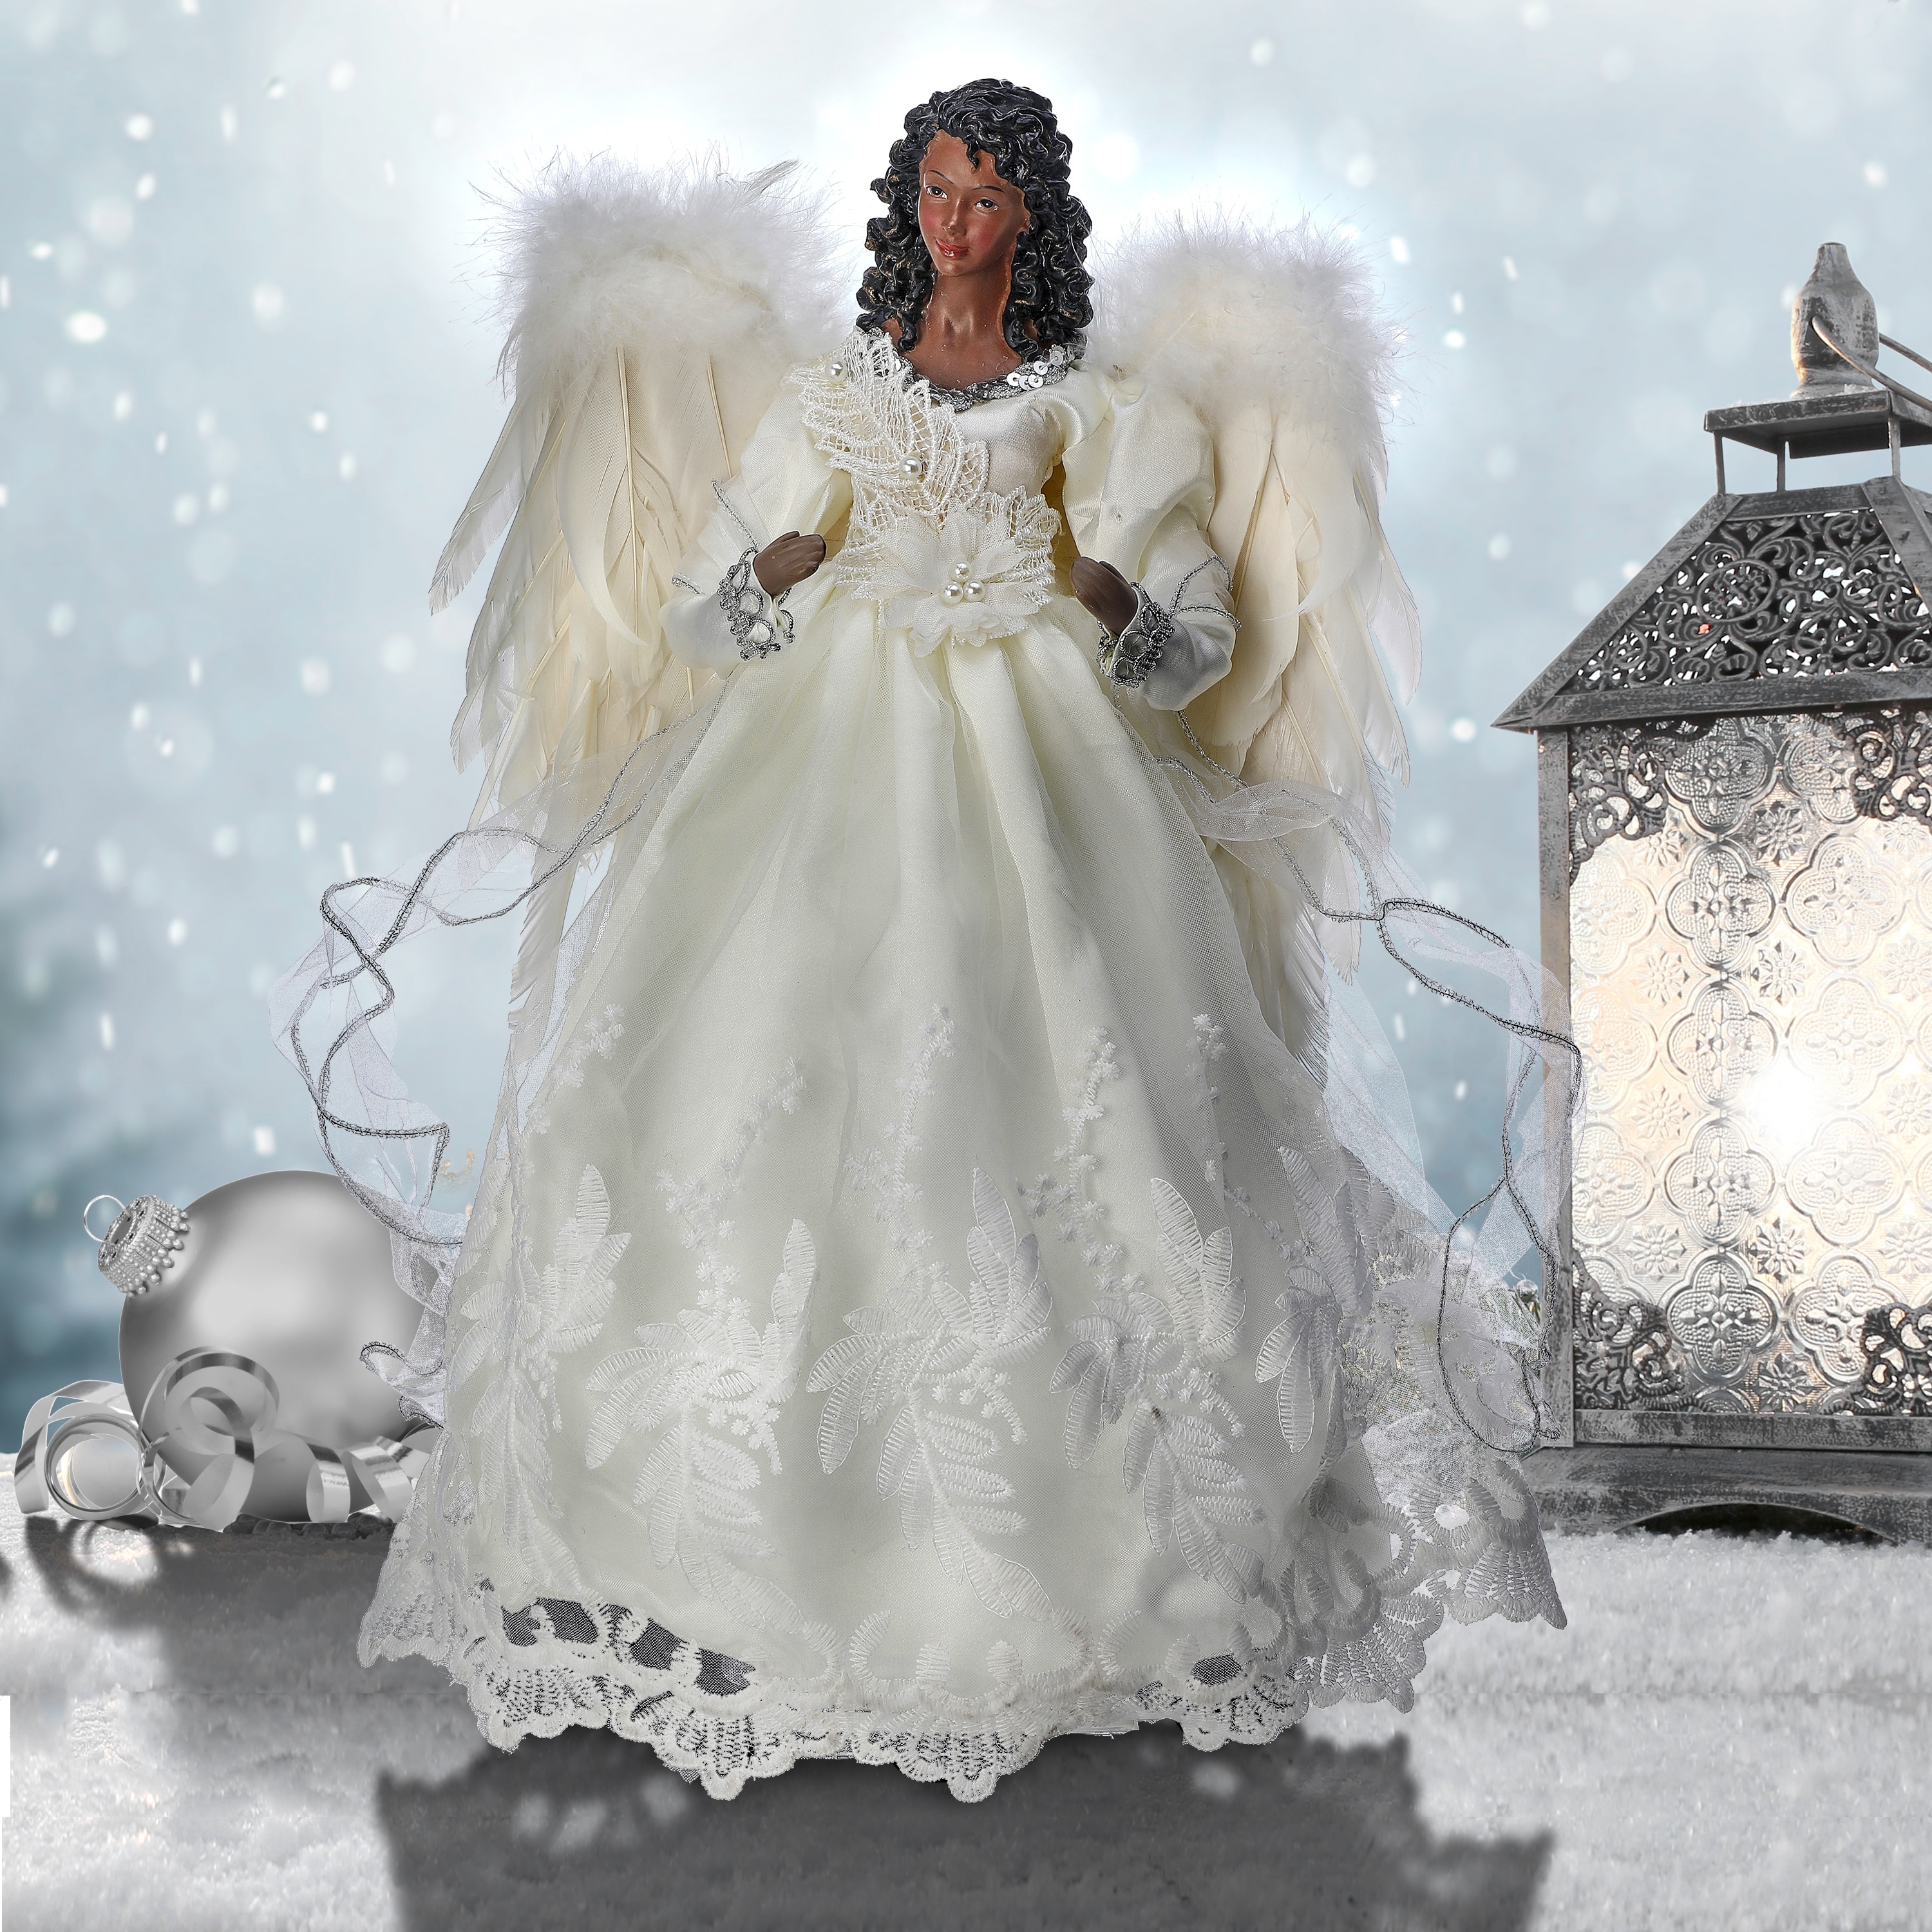 https://ak1.ostkcdn.com/images/products/is/images/direct/4bf4ae9c882d69a7a6ead0dcdd5c1a55ef62c199/16%22-Fabric-With-Lace-Black-Angel-Tree-Topper.jpg